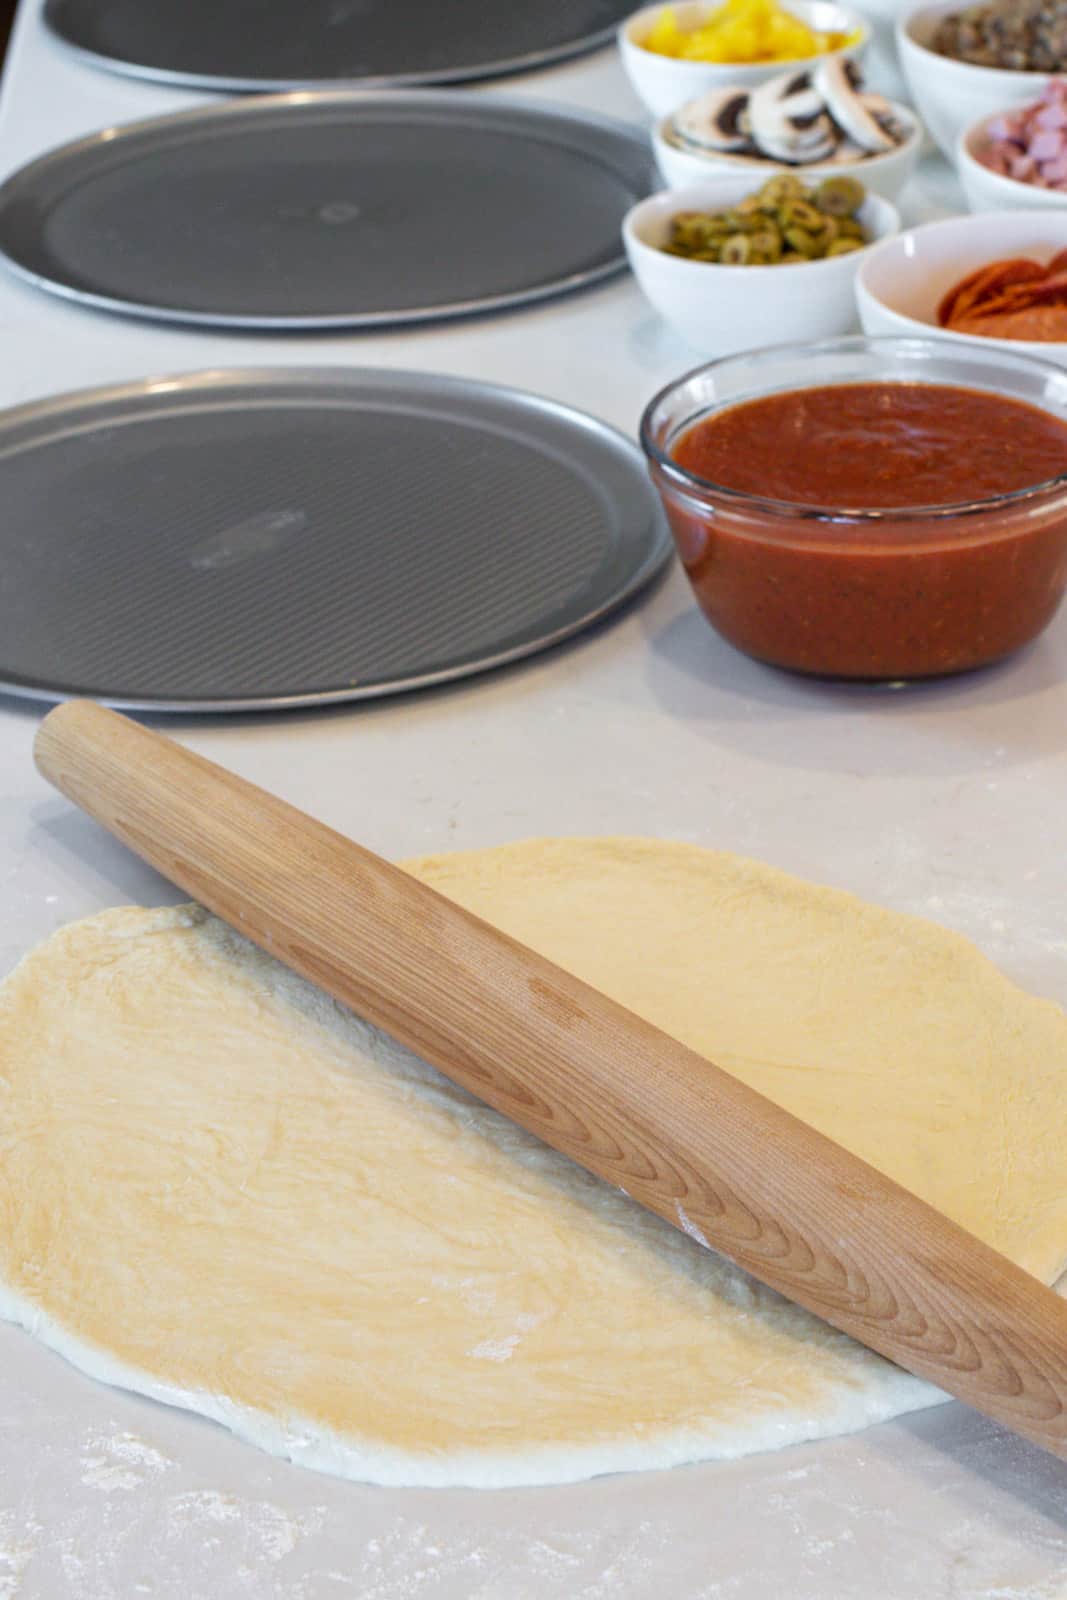 A rolling pin on a rolled out pizza dough.